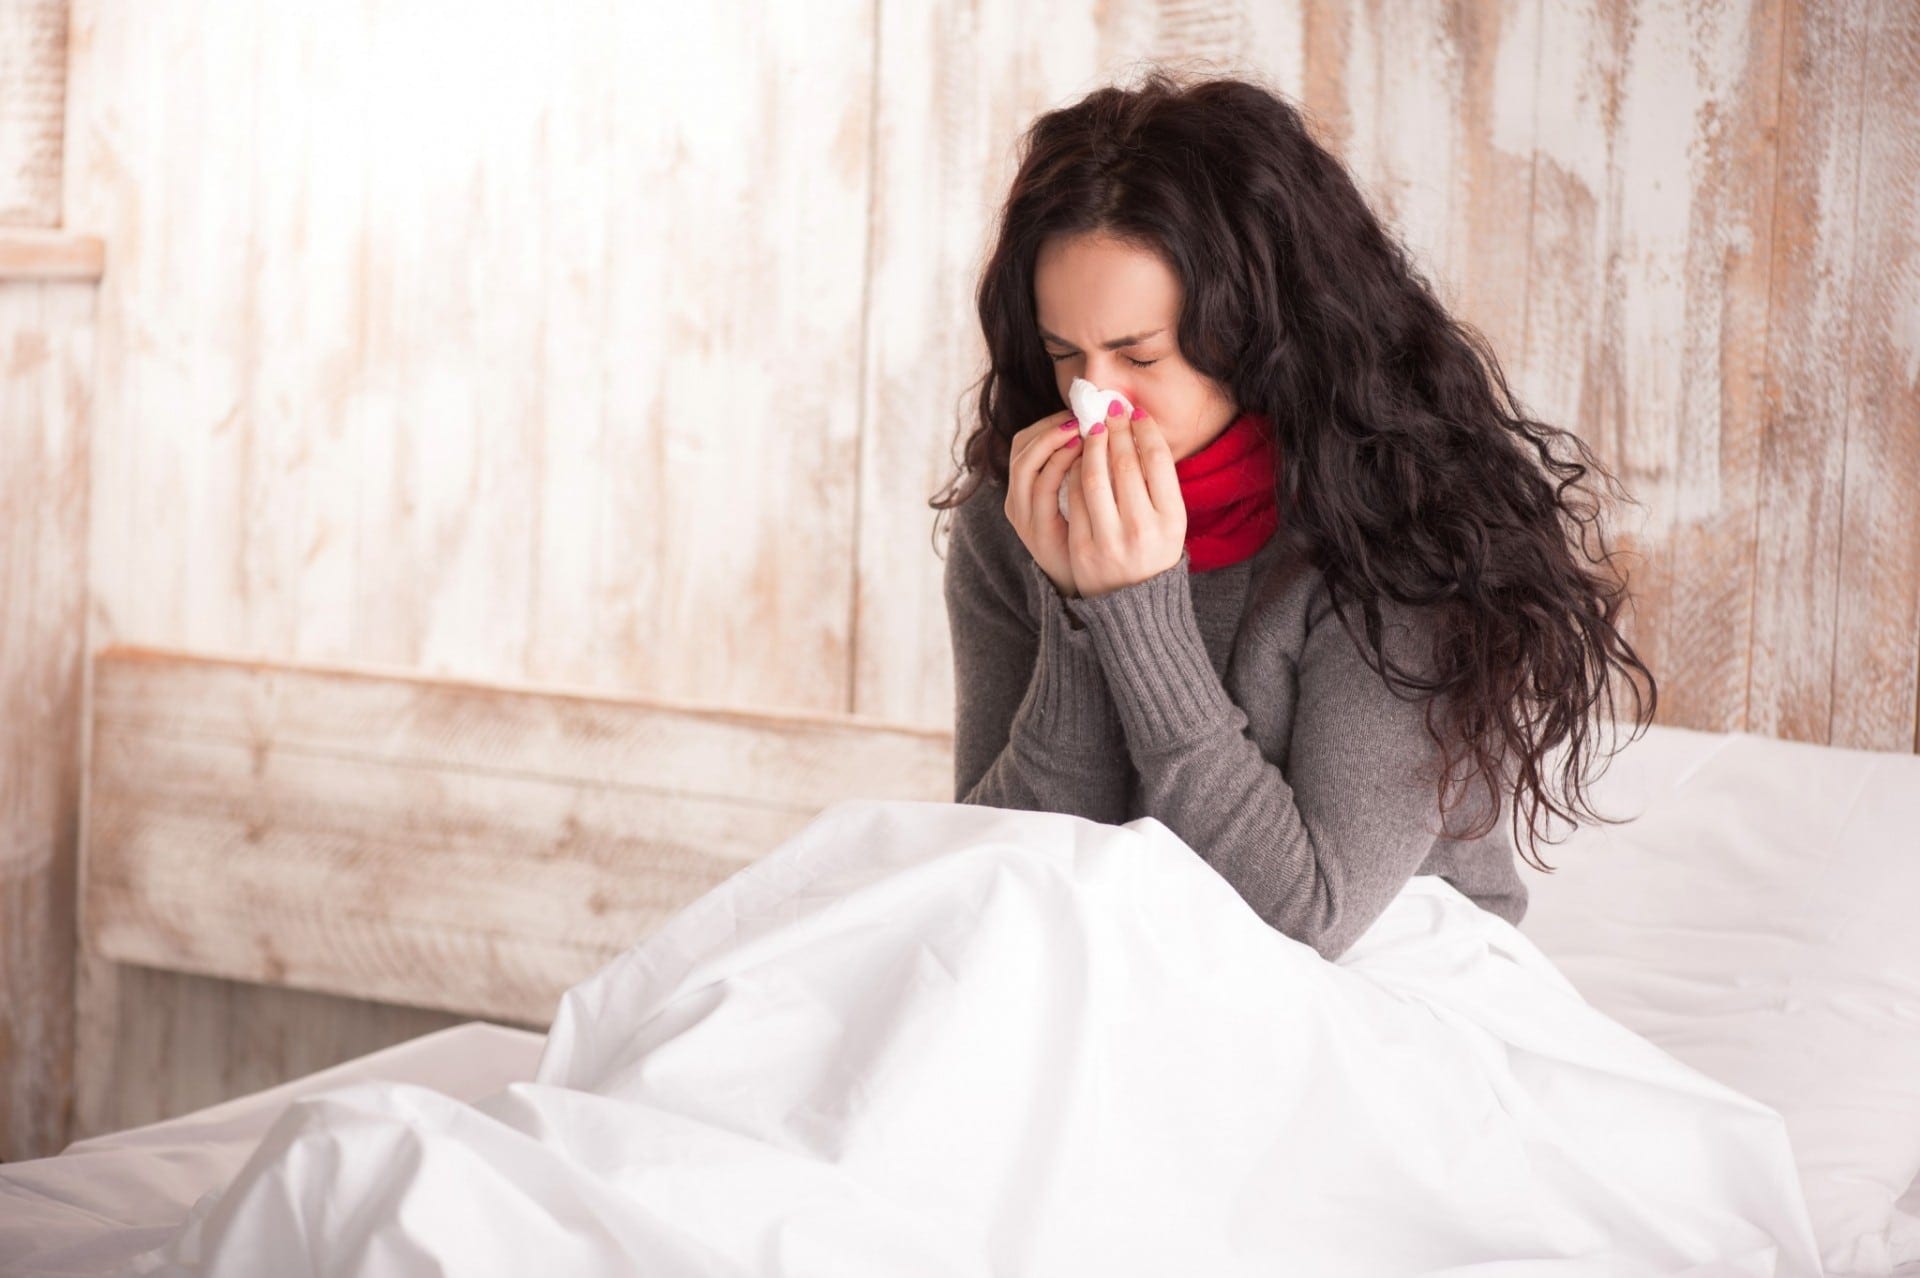 How To Prevent Colds And Flu